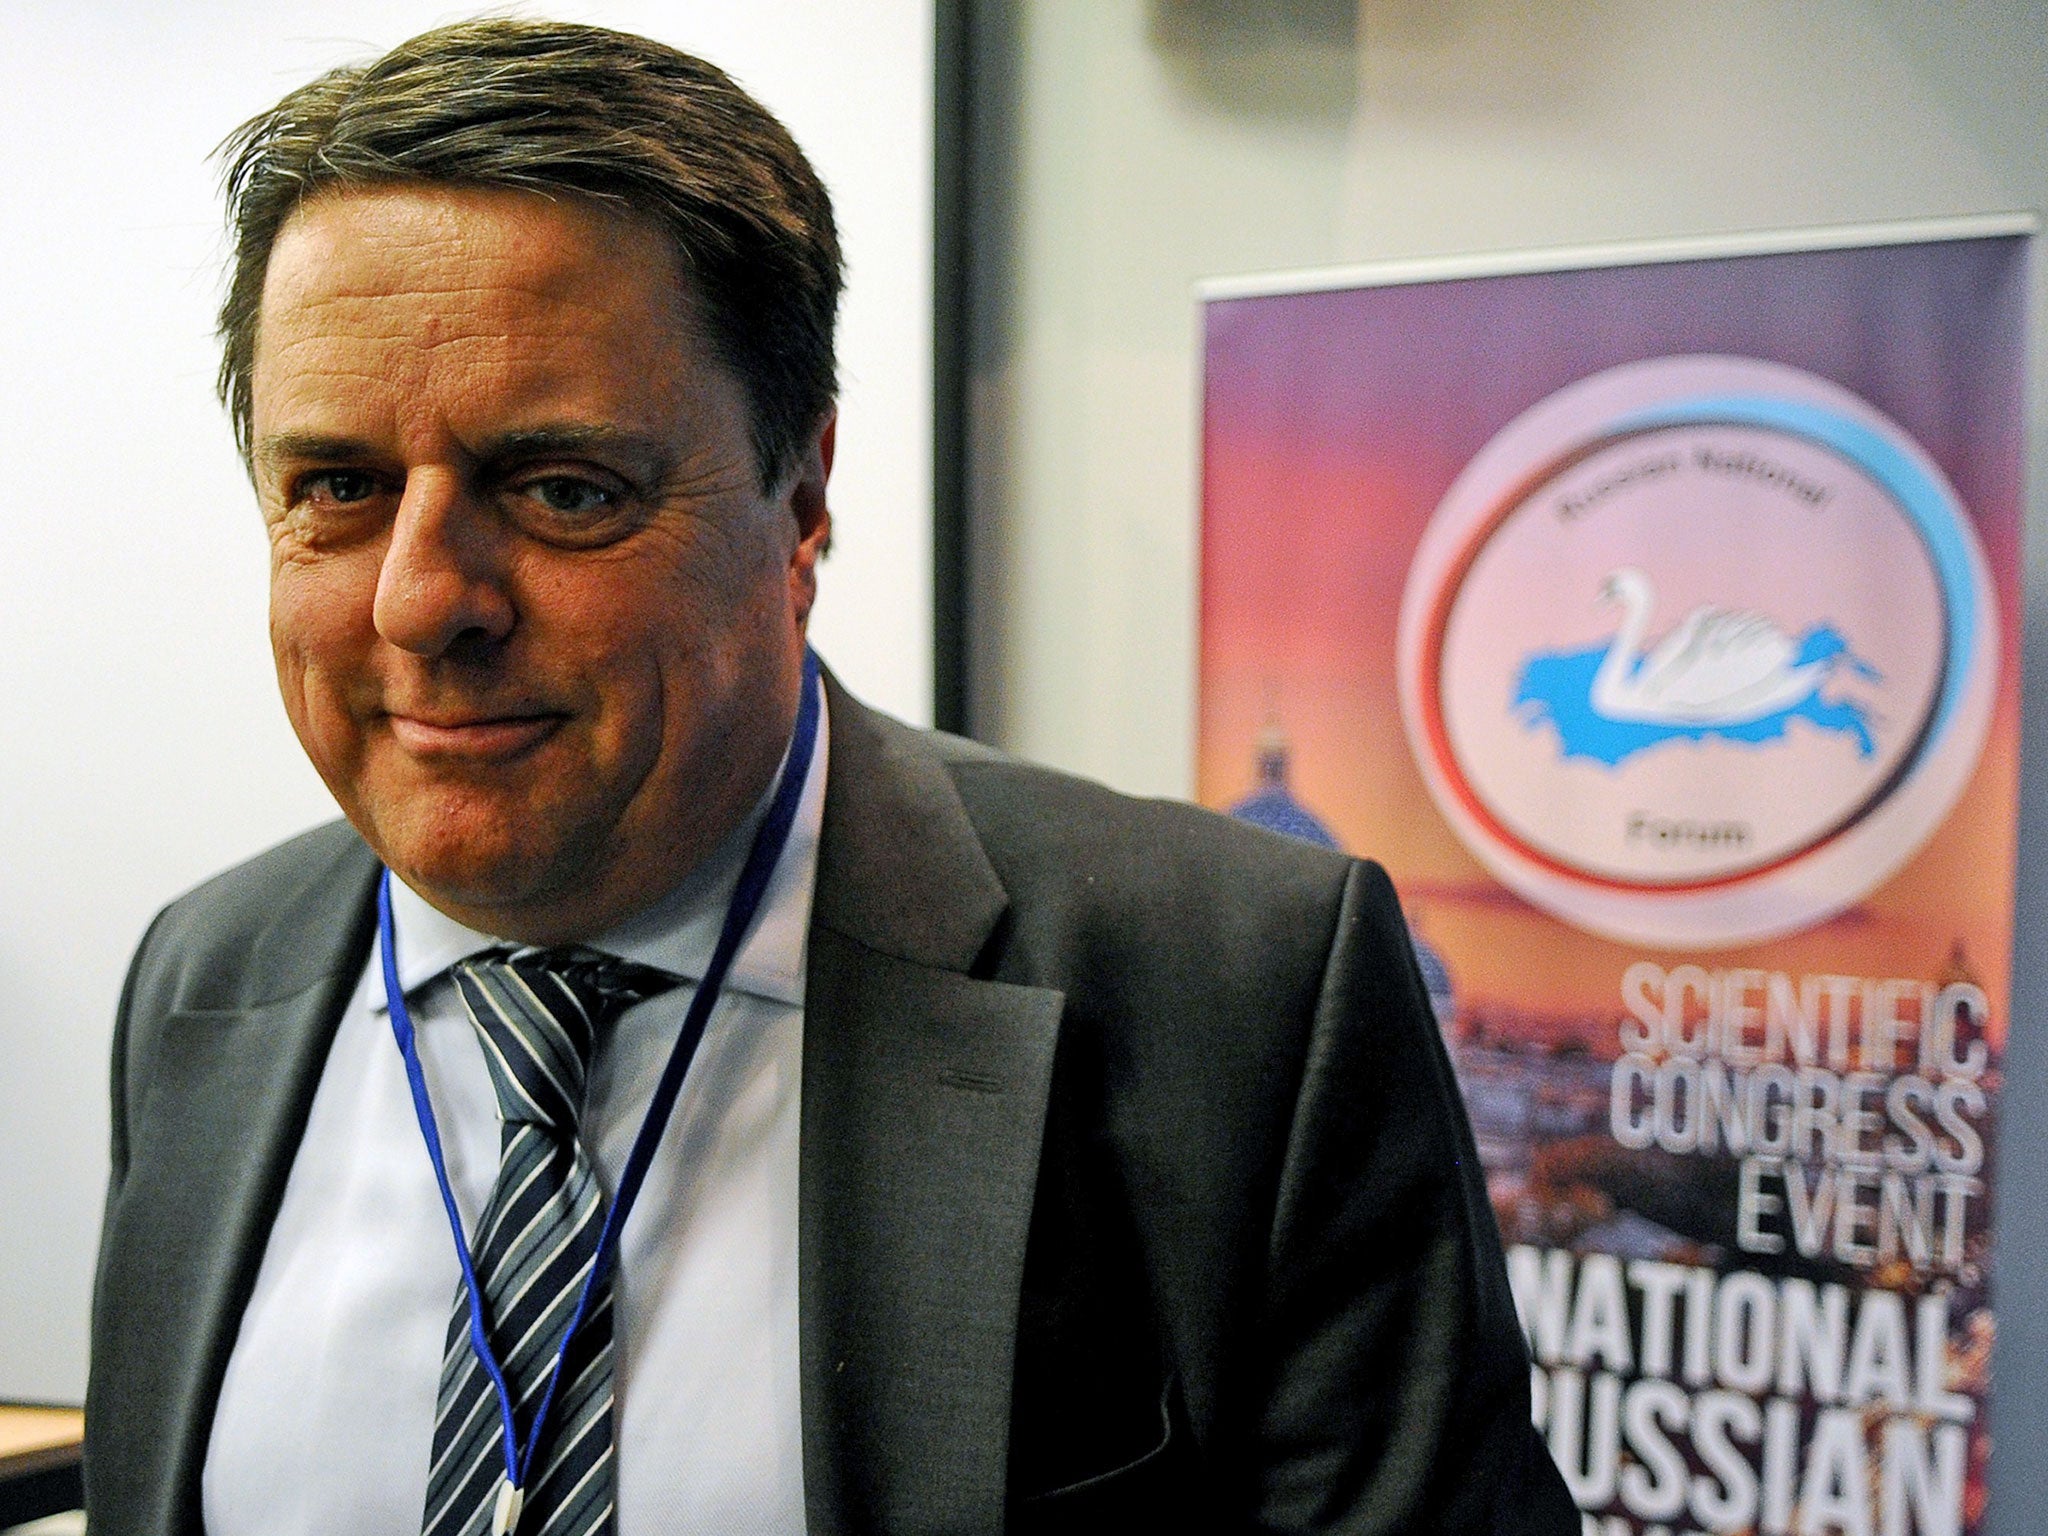 Former head of the British National Party Nick Griffin takes part in the International Russian Conservative Forum in Saint-Petersburg on March 22, 2015. Representatives of about a dozen far-right groups from across Europe gathered in Russia for a pro-Krem